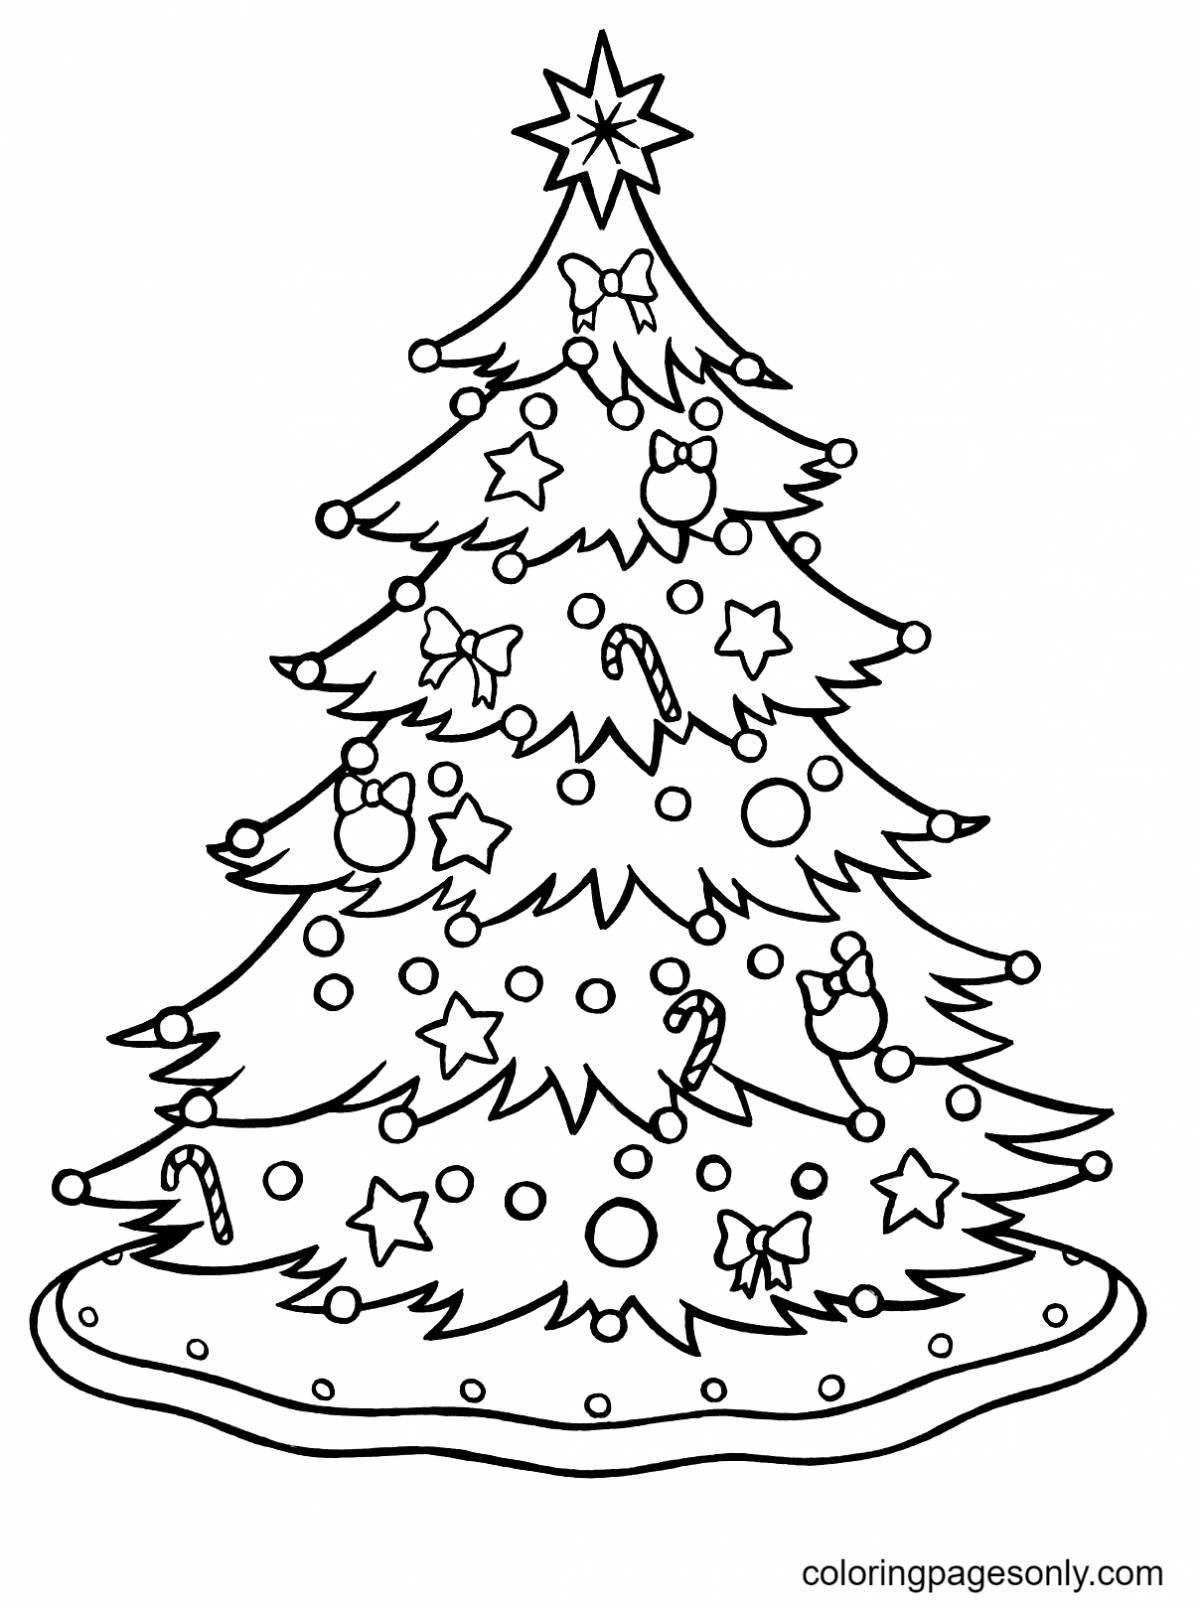 Fairytale Christmas tree coloring book for girls